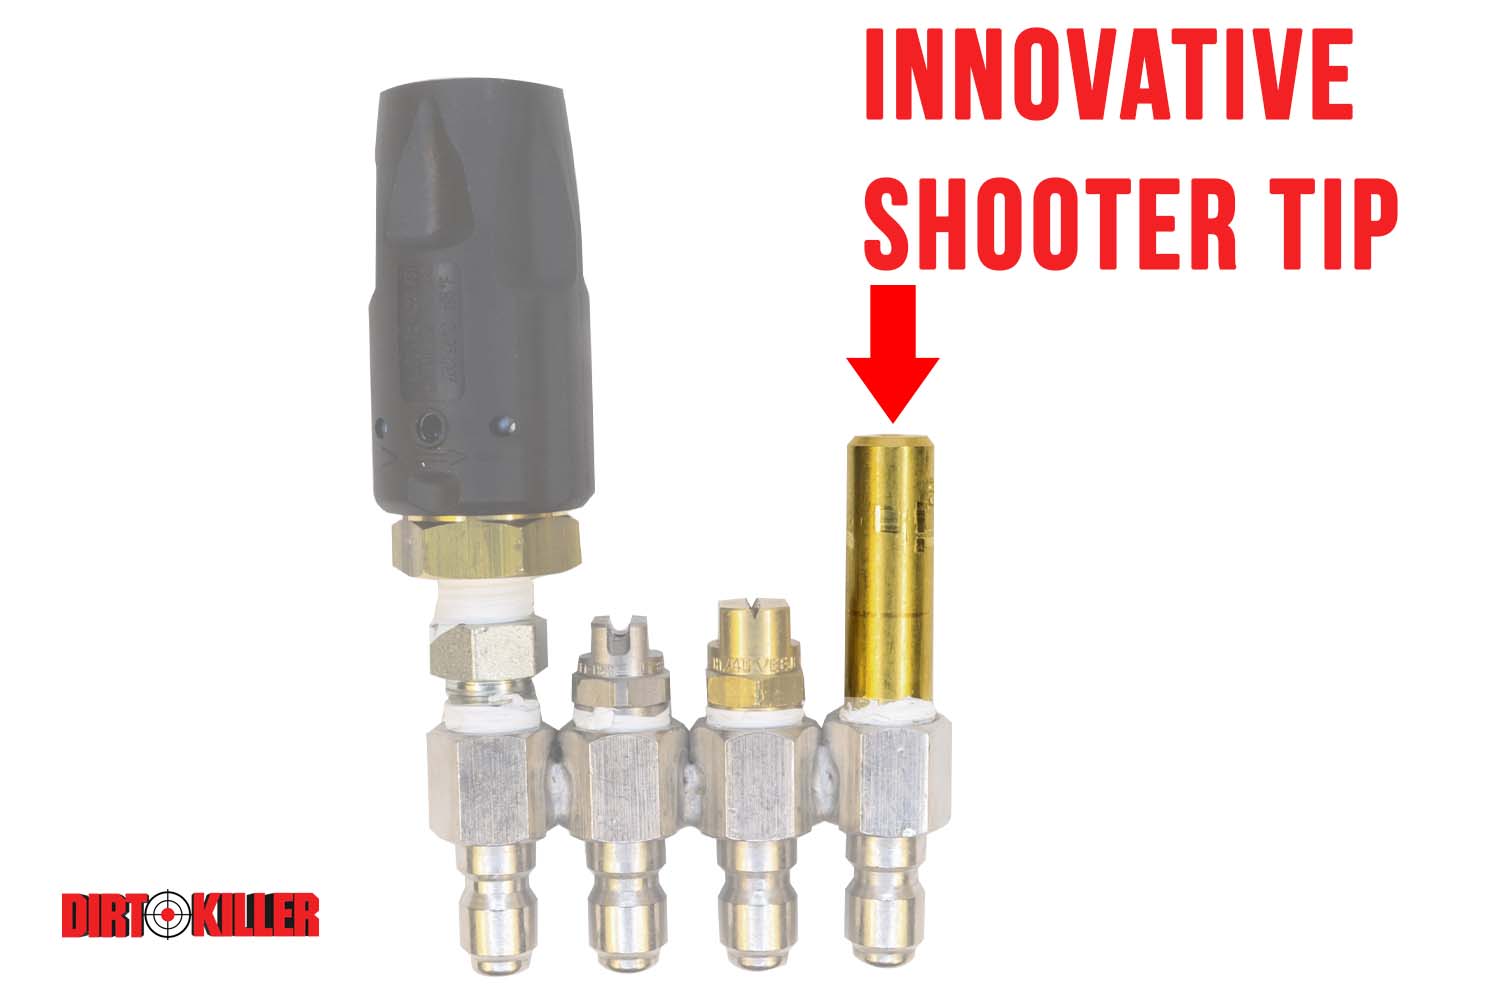 Innovative Shooter Tip 6 gpm Soap Nozzle-image_1